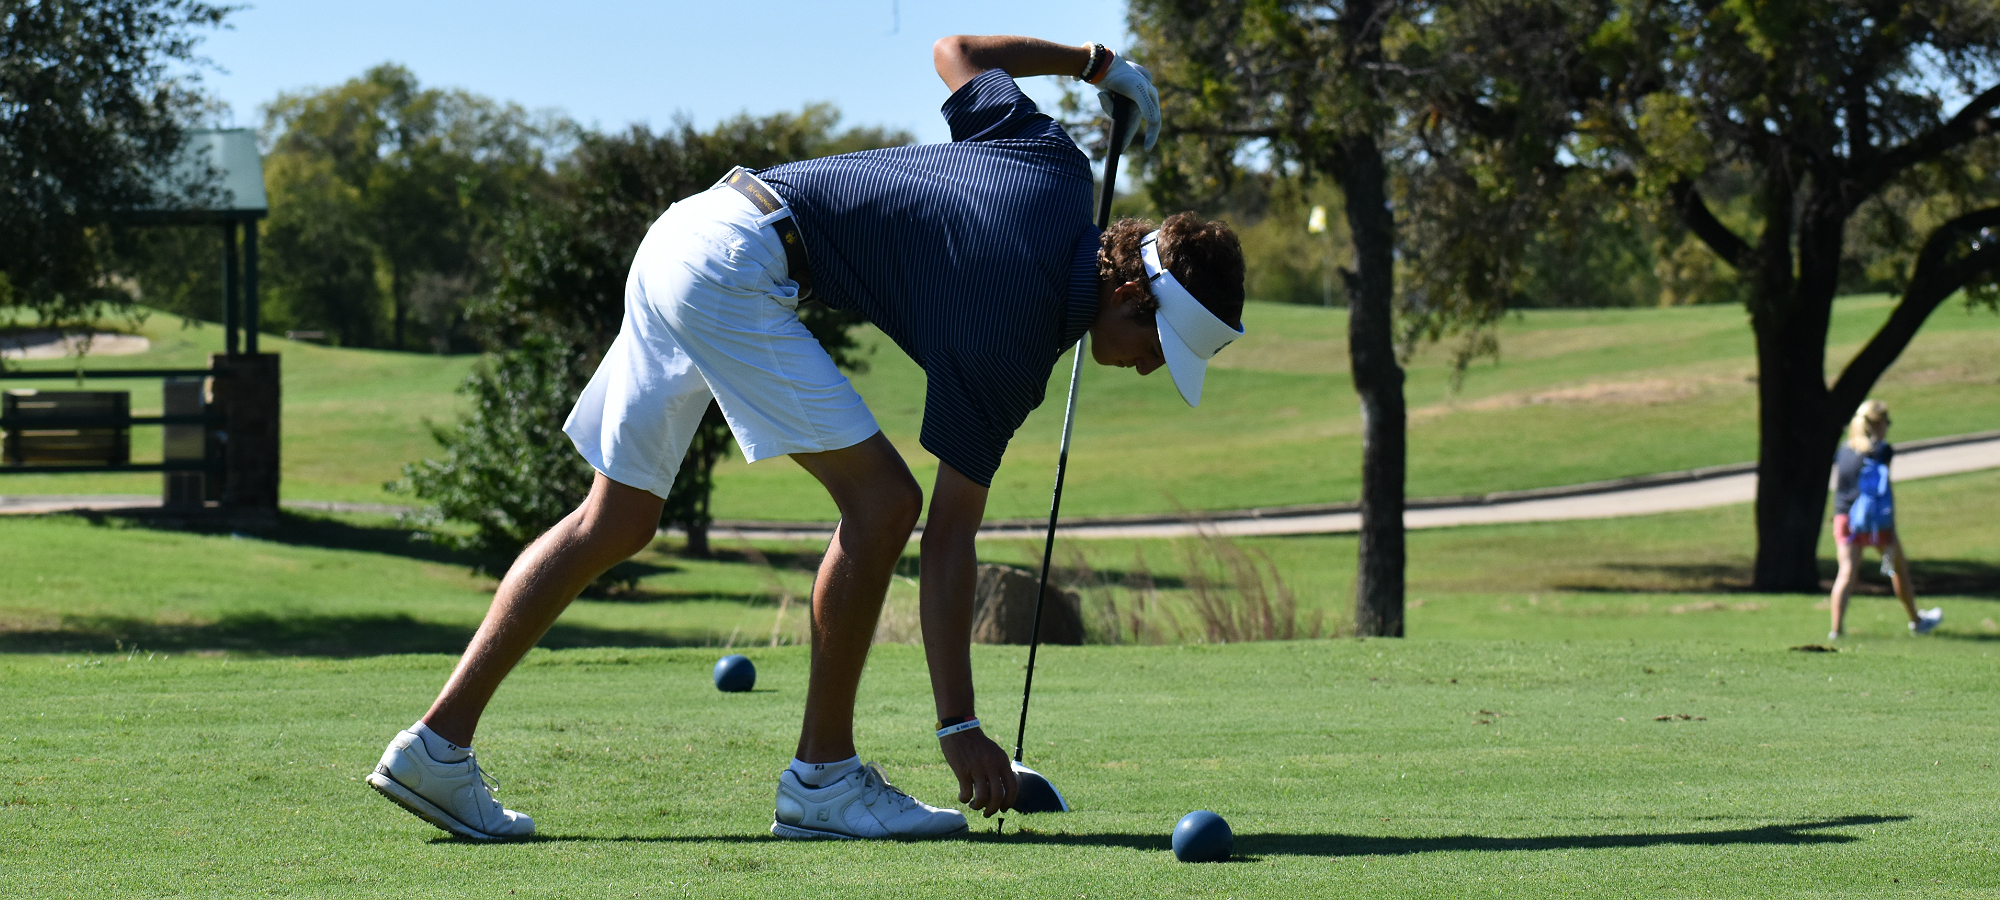 Crusaders competed two rounds on Monday in West Region Invitational. Third round will be Tuesday.